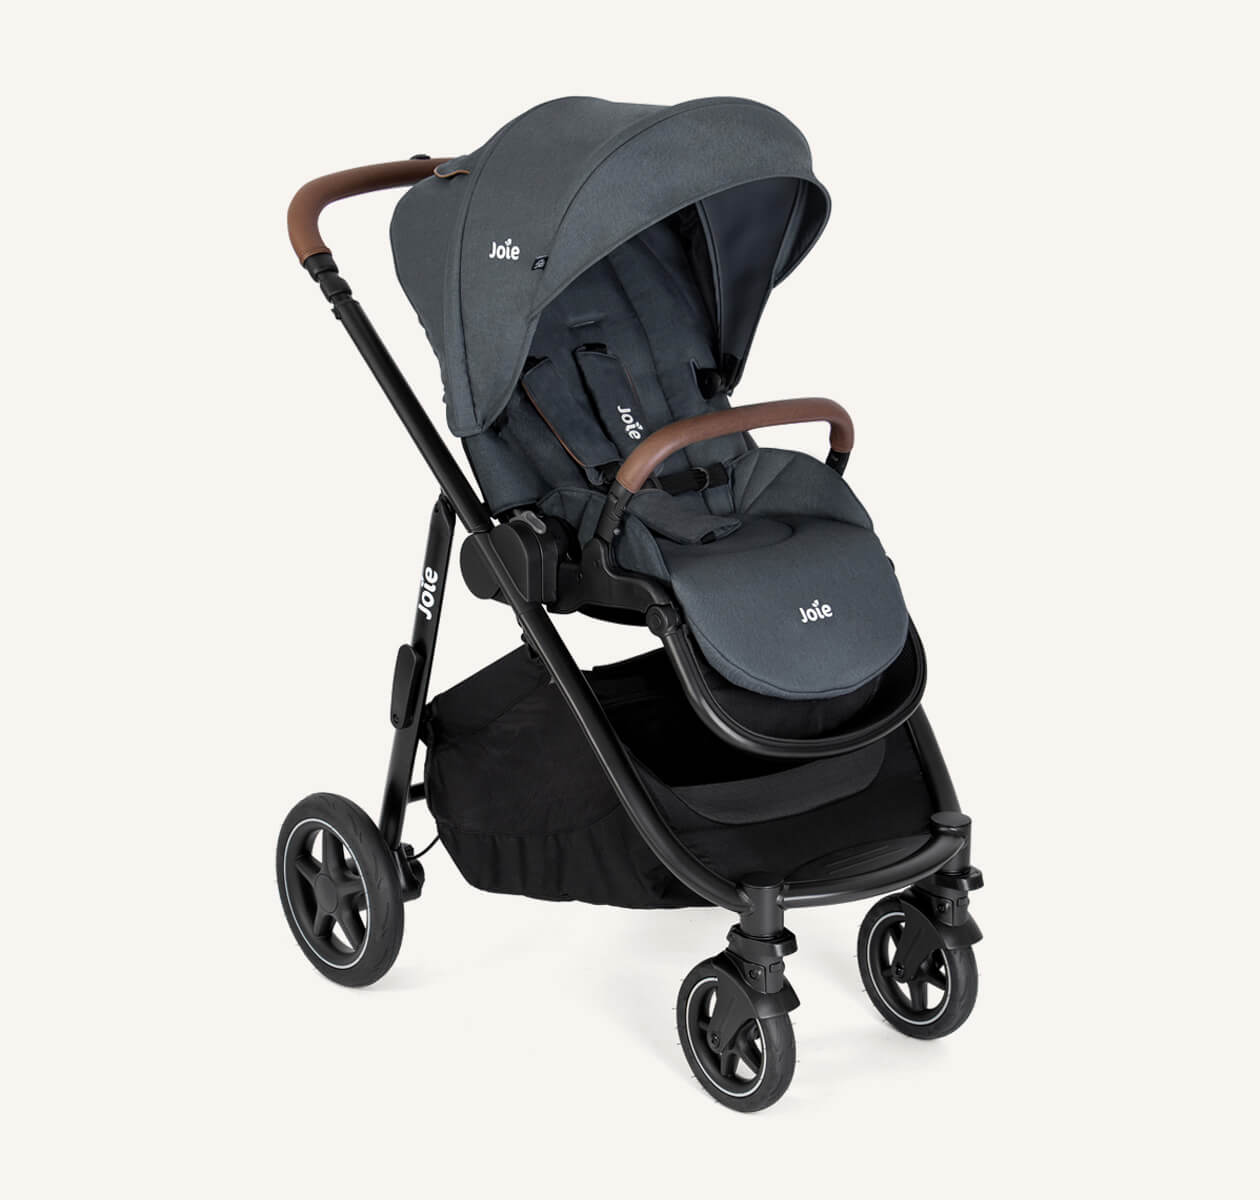 Joie blue versatrax pram positioned at a right angle.